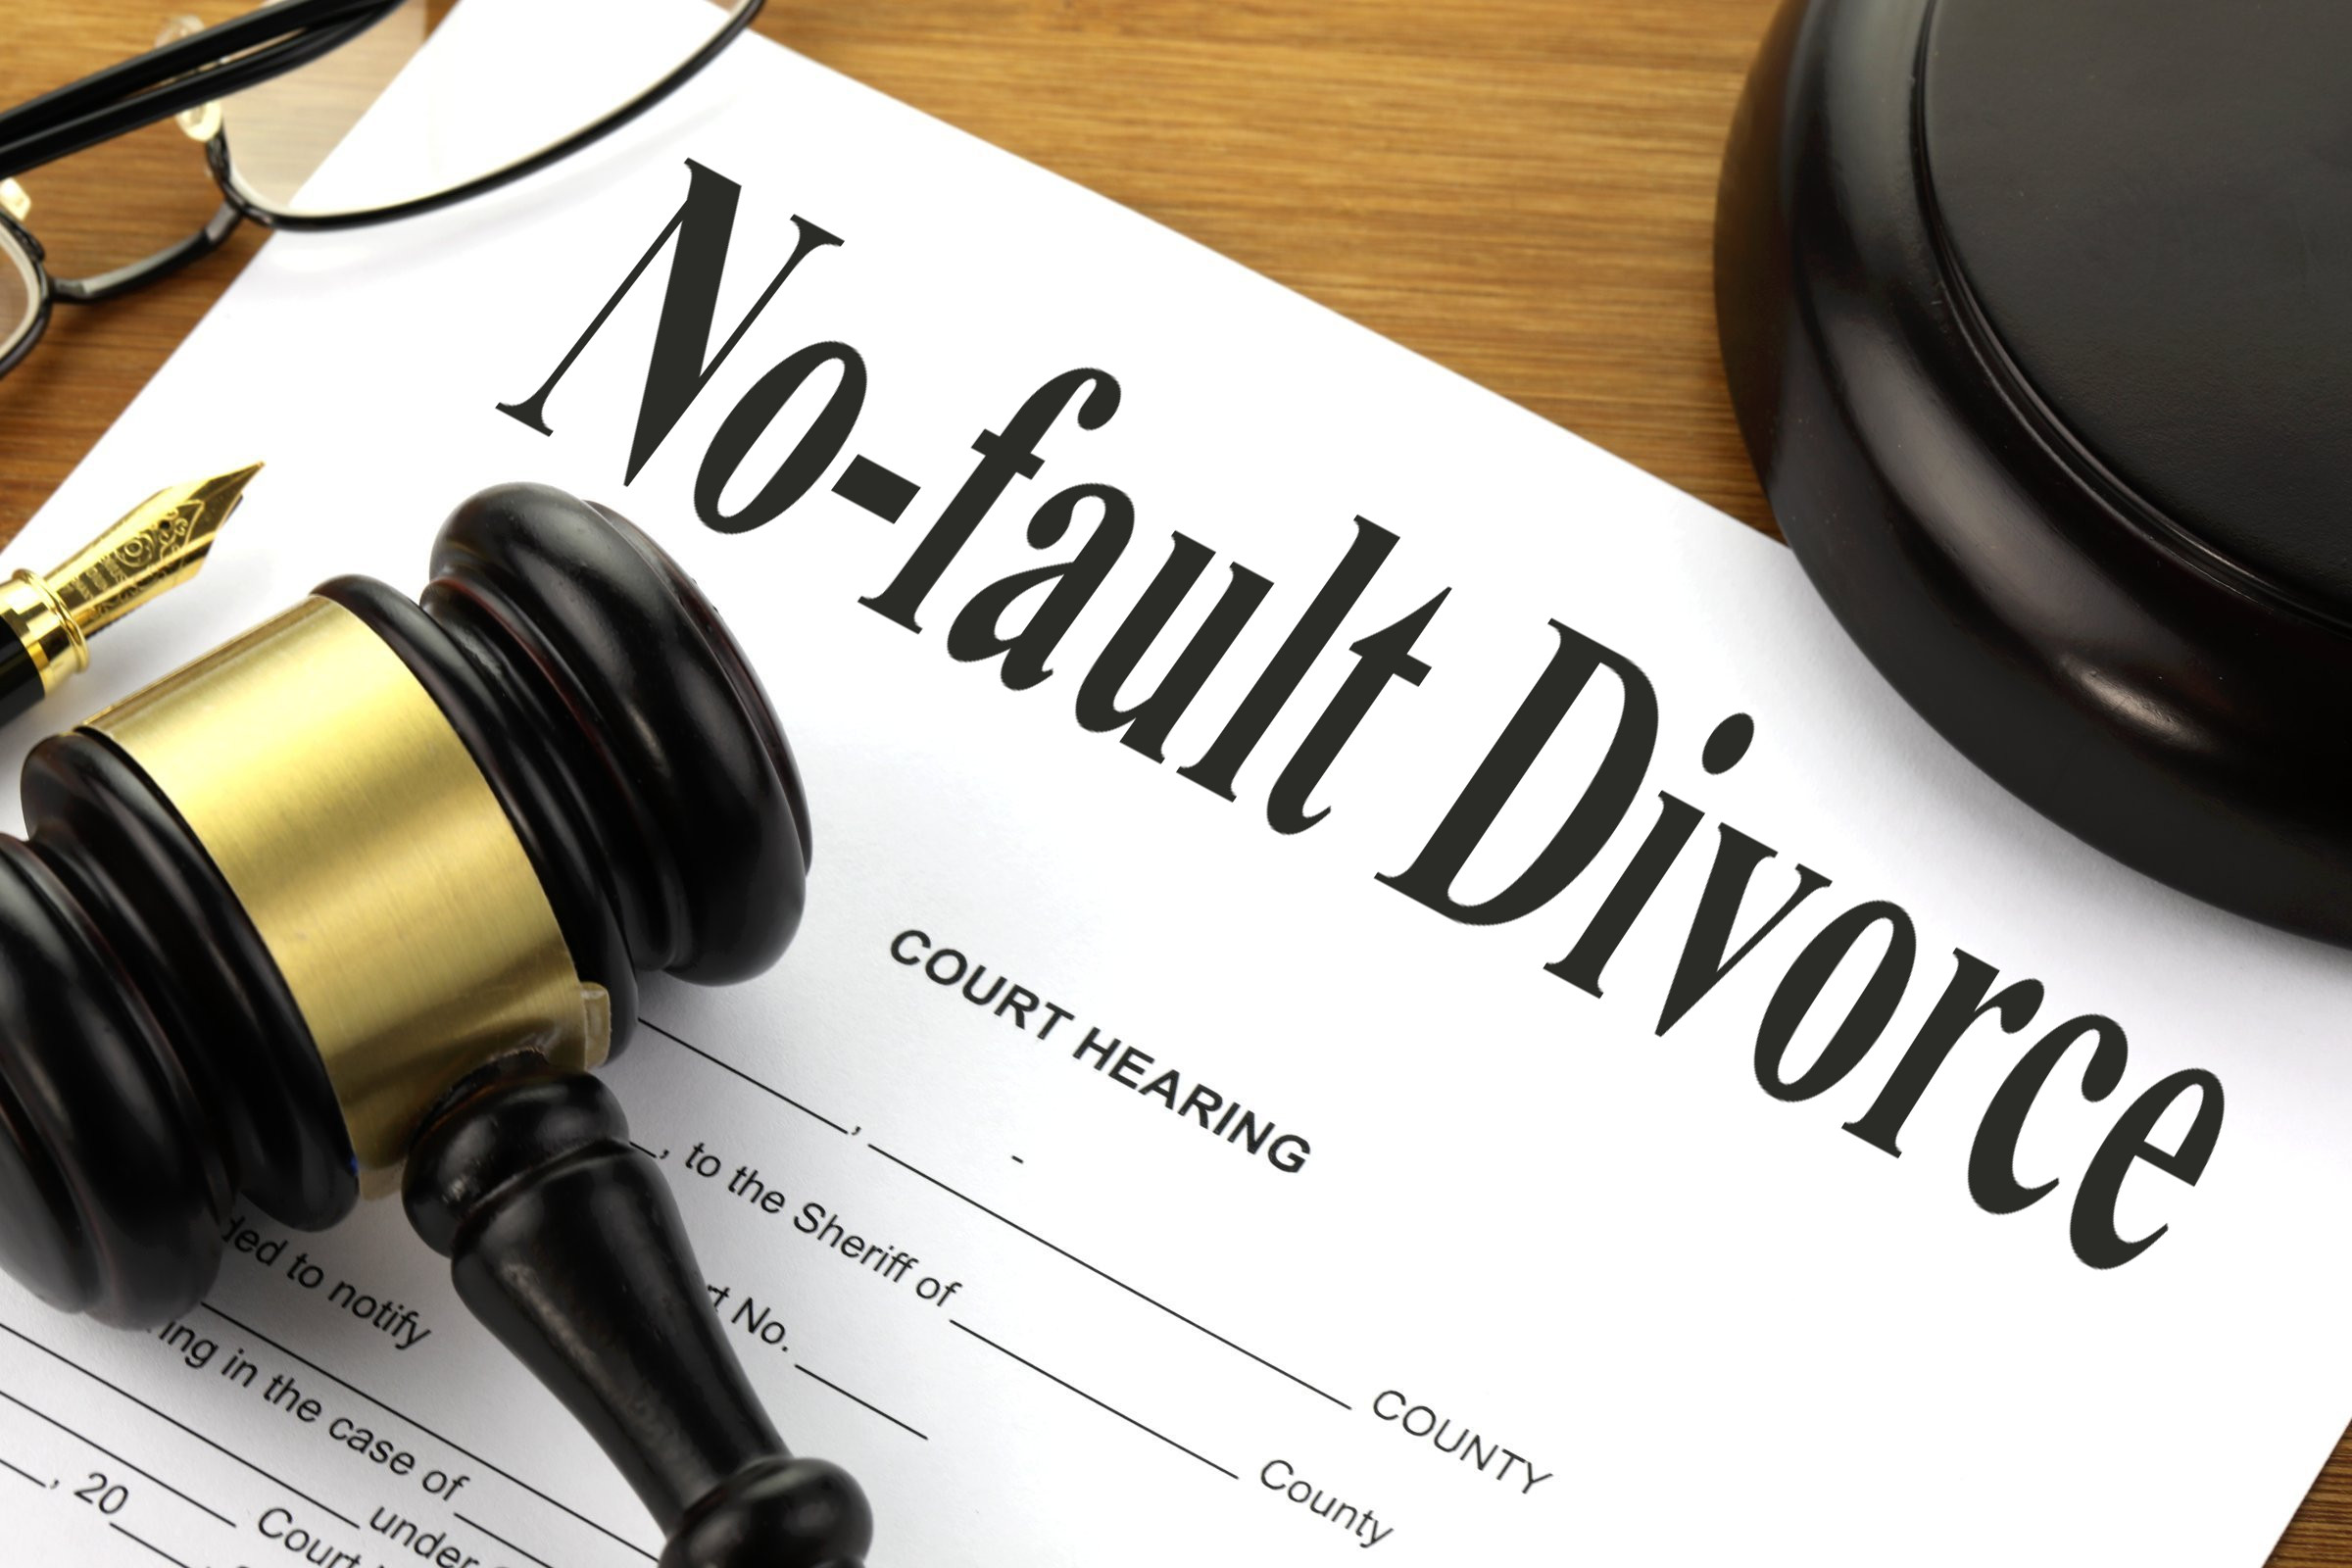 No Fault Divorce - Free of Charge Creative Commons Legal 1 image